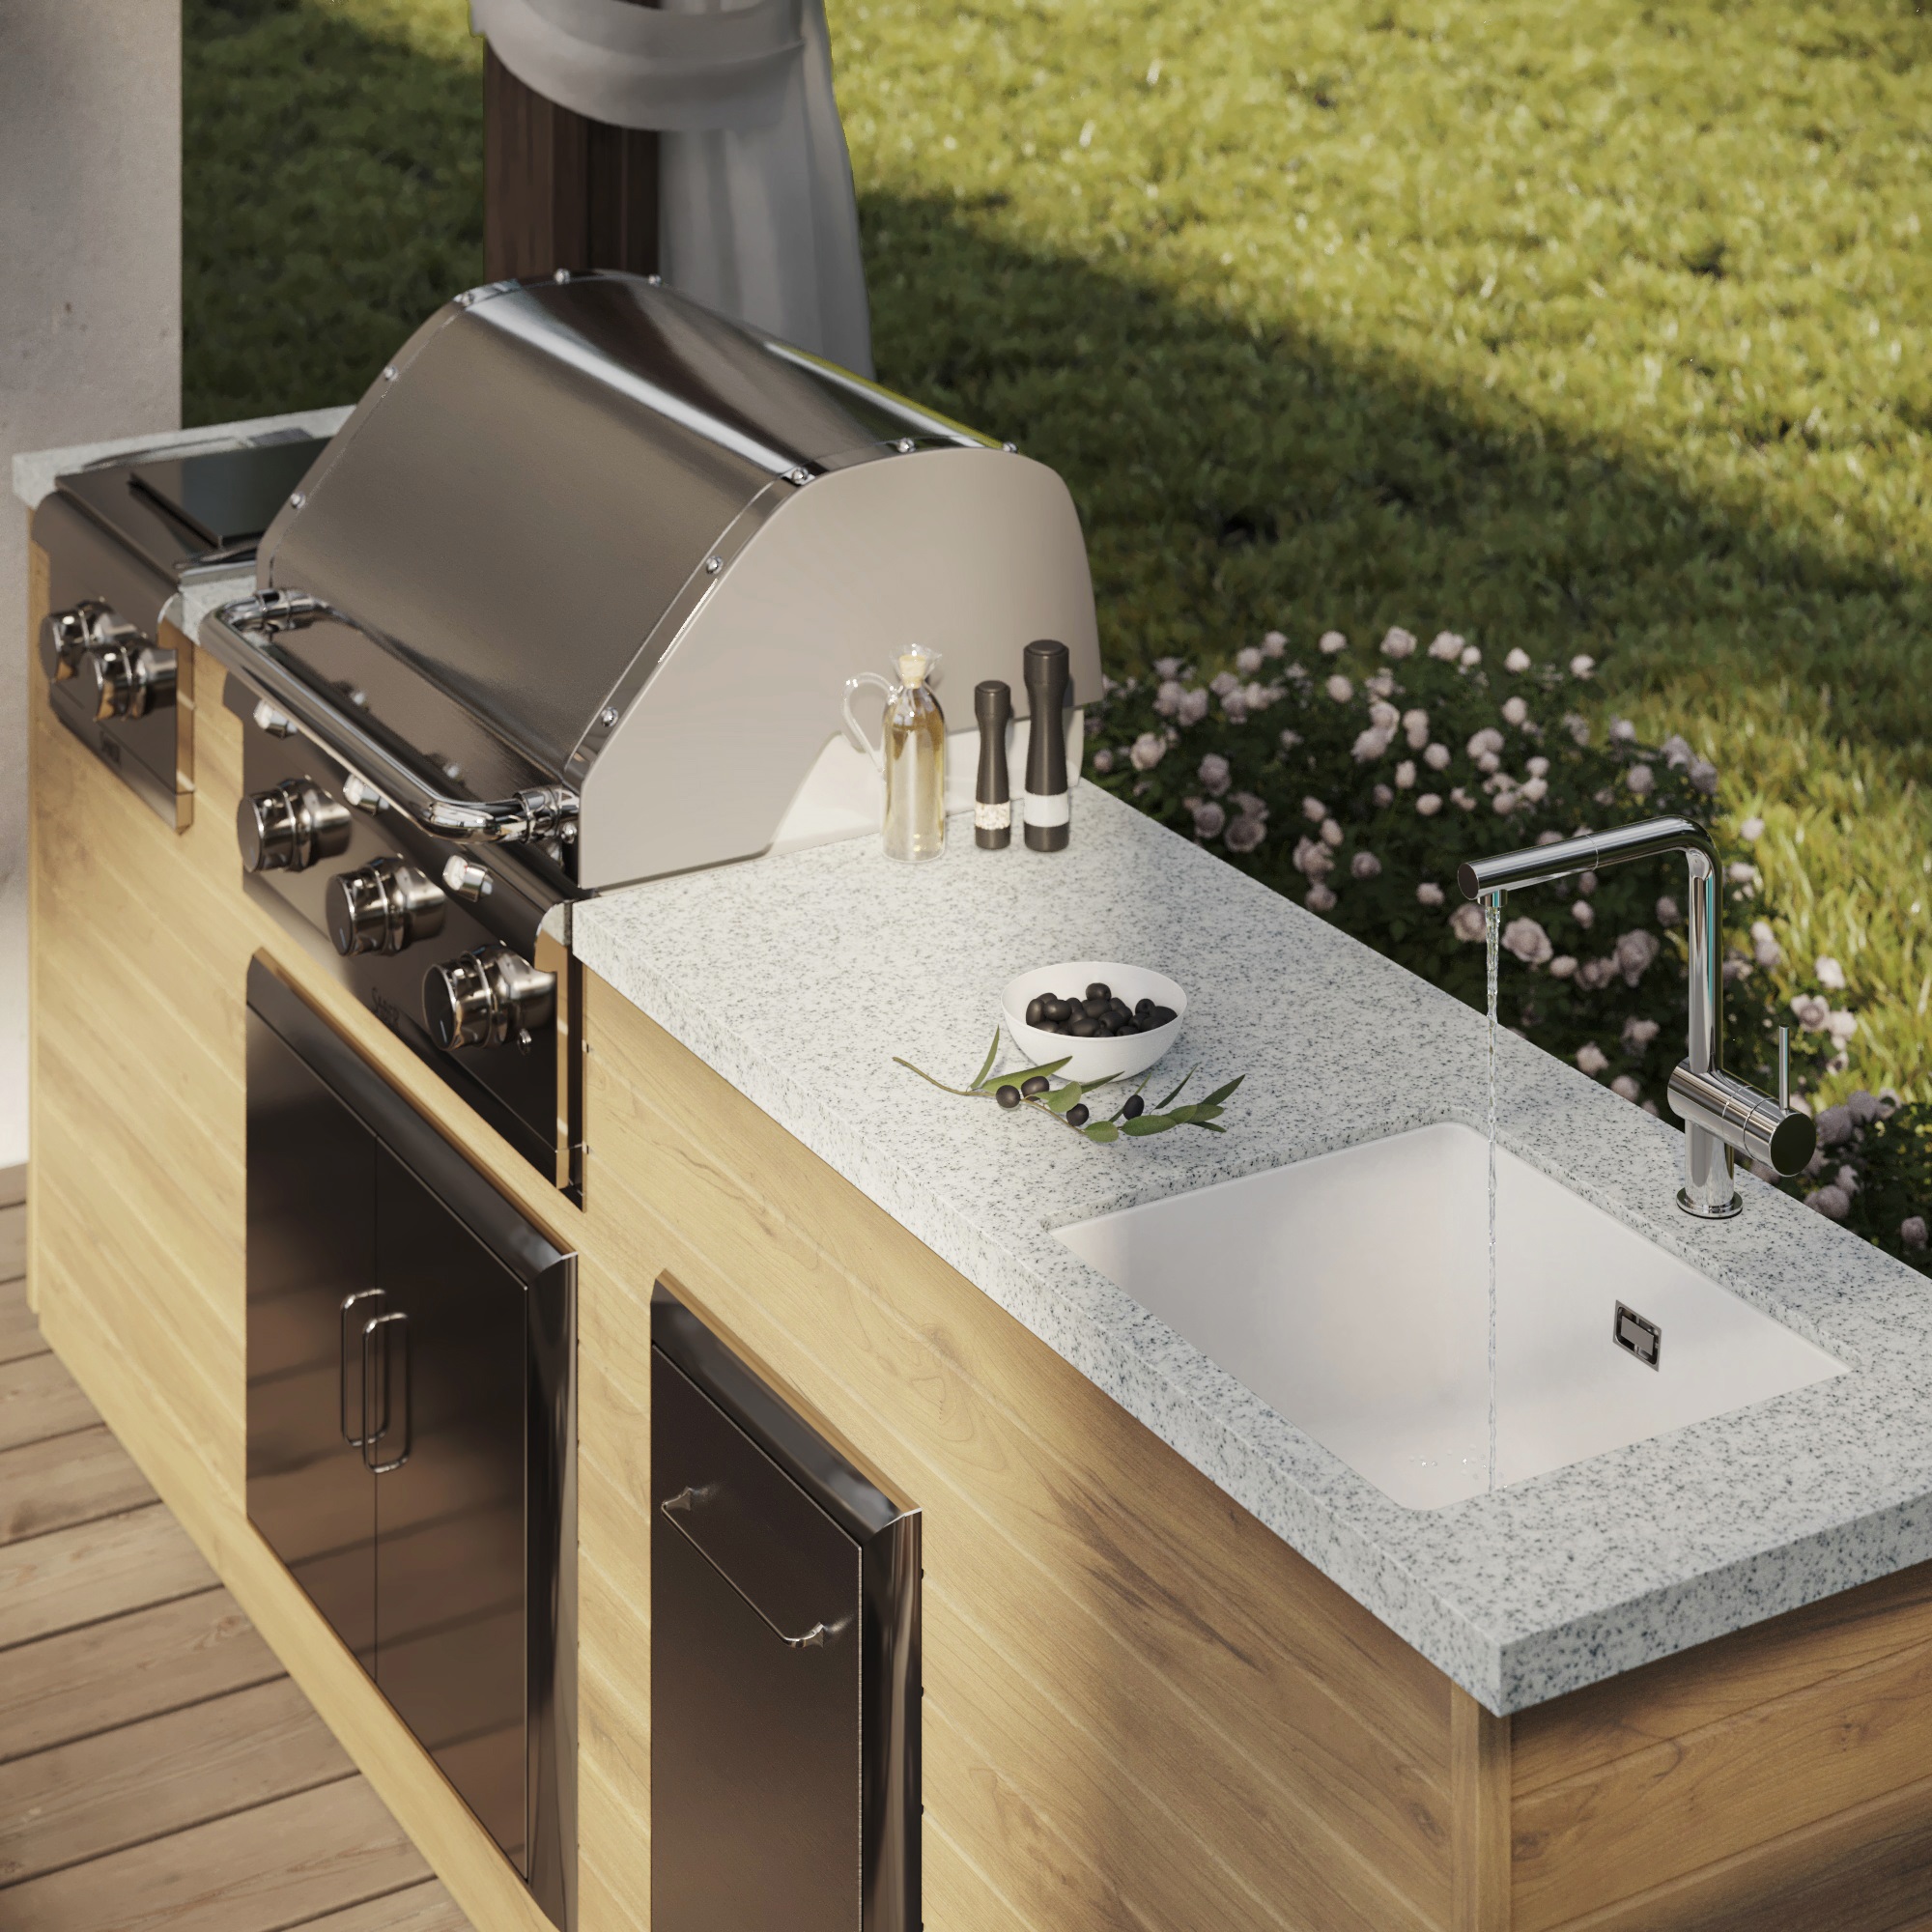 LX Hausys countertops can be an excellent choice for outdoor kitchens with their exceptional durability and aesthetic appeal.